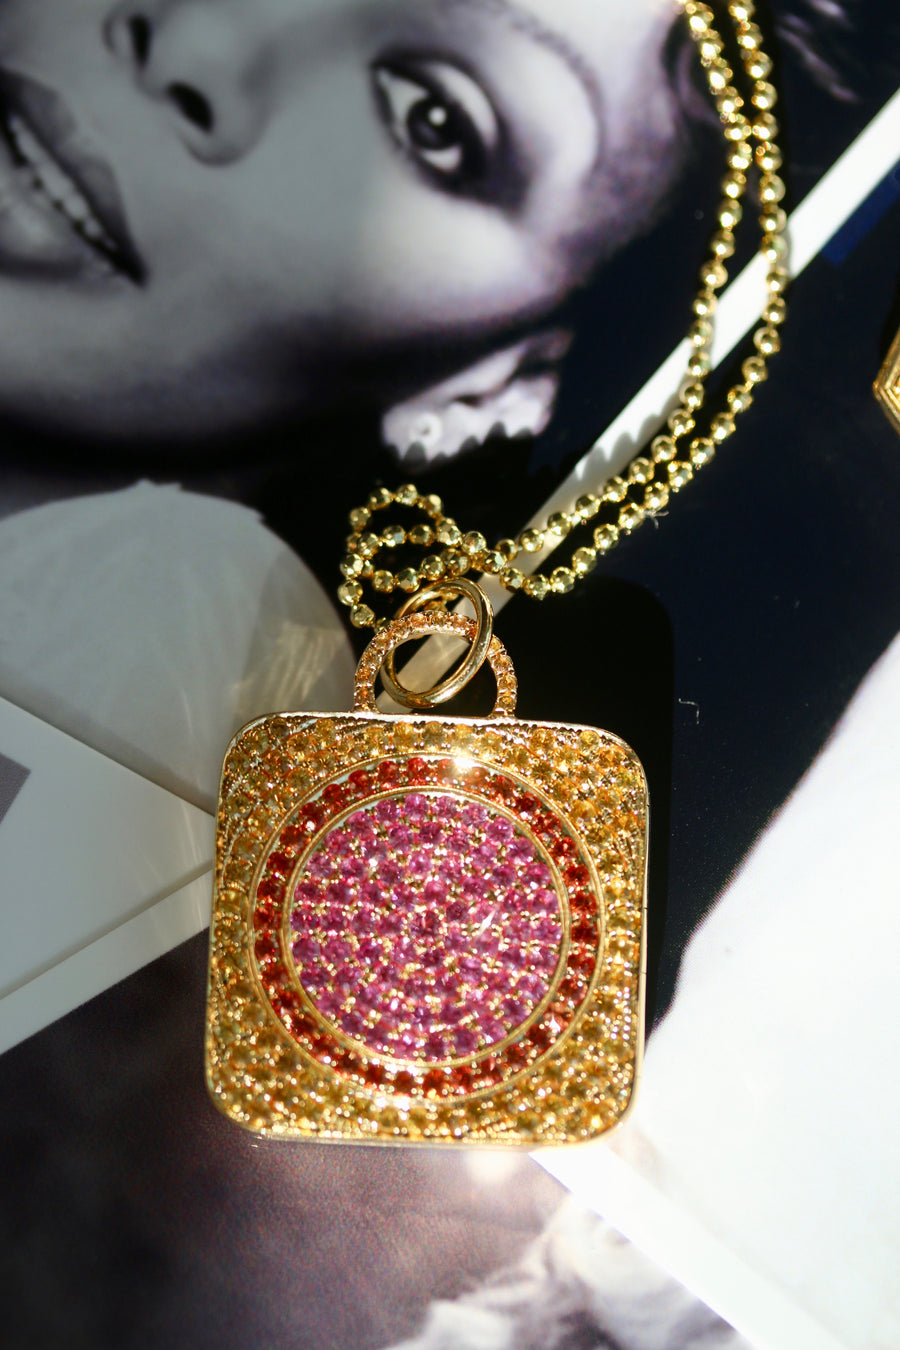 Square locket crafted in 18k gold, adorned with beautiful pink sapphires. This stunning piece features a contemporary design with intricate detailing and vibrant pink sapphire accents. The pink sapphires add a pop of color and elegance to the square locket, creating a unique and eye-catching accessory.